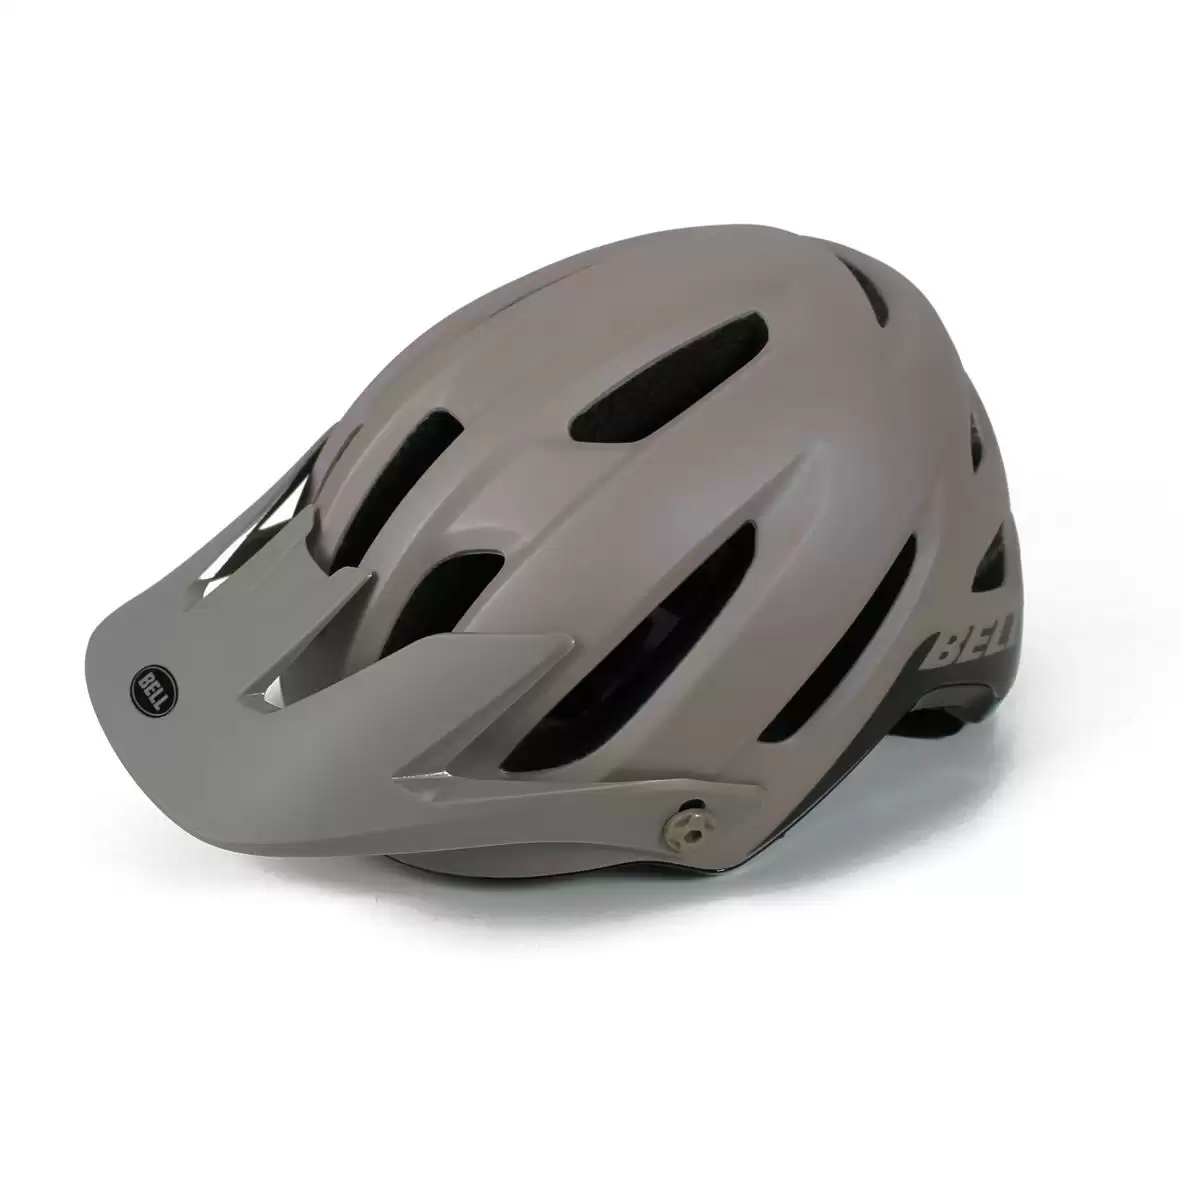 Helmet 4FORTY MIPS Sand size S (52-56cm) - image